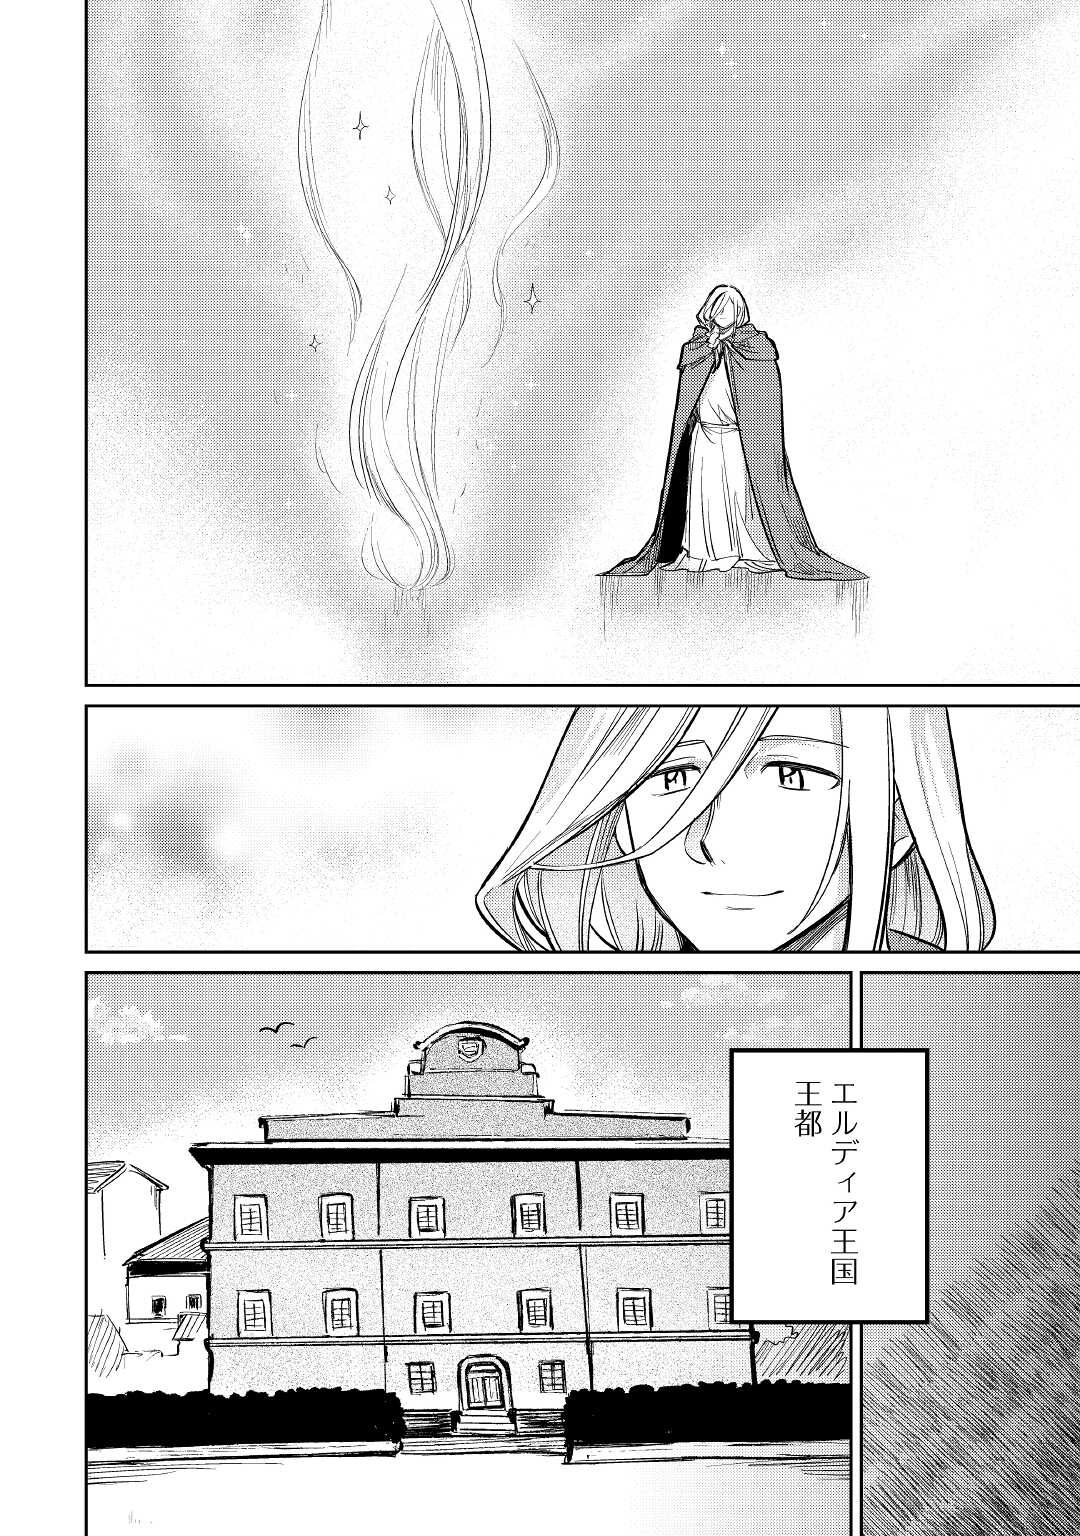 The Former Structural Researcher’s Story of Otherworldly Adventure 第41話 - Page 24